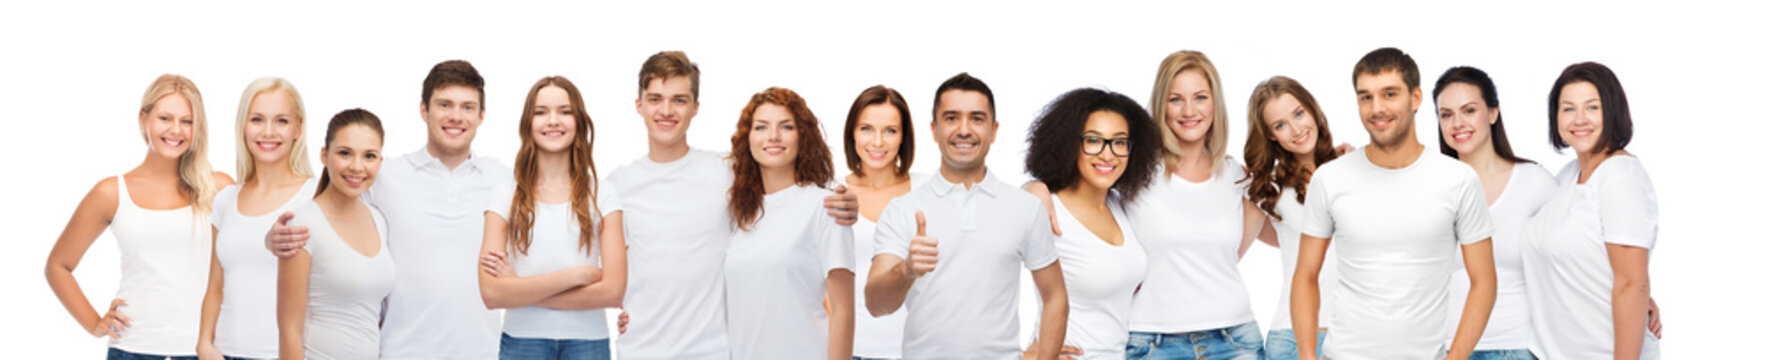 group of happy different people in white t-shirts